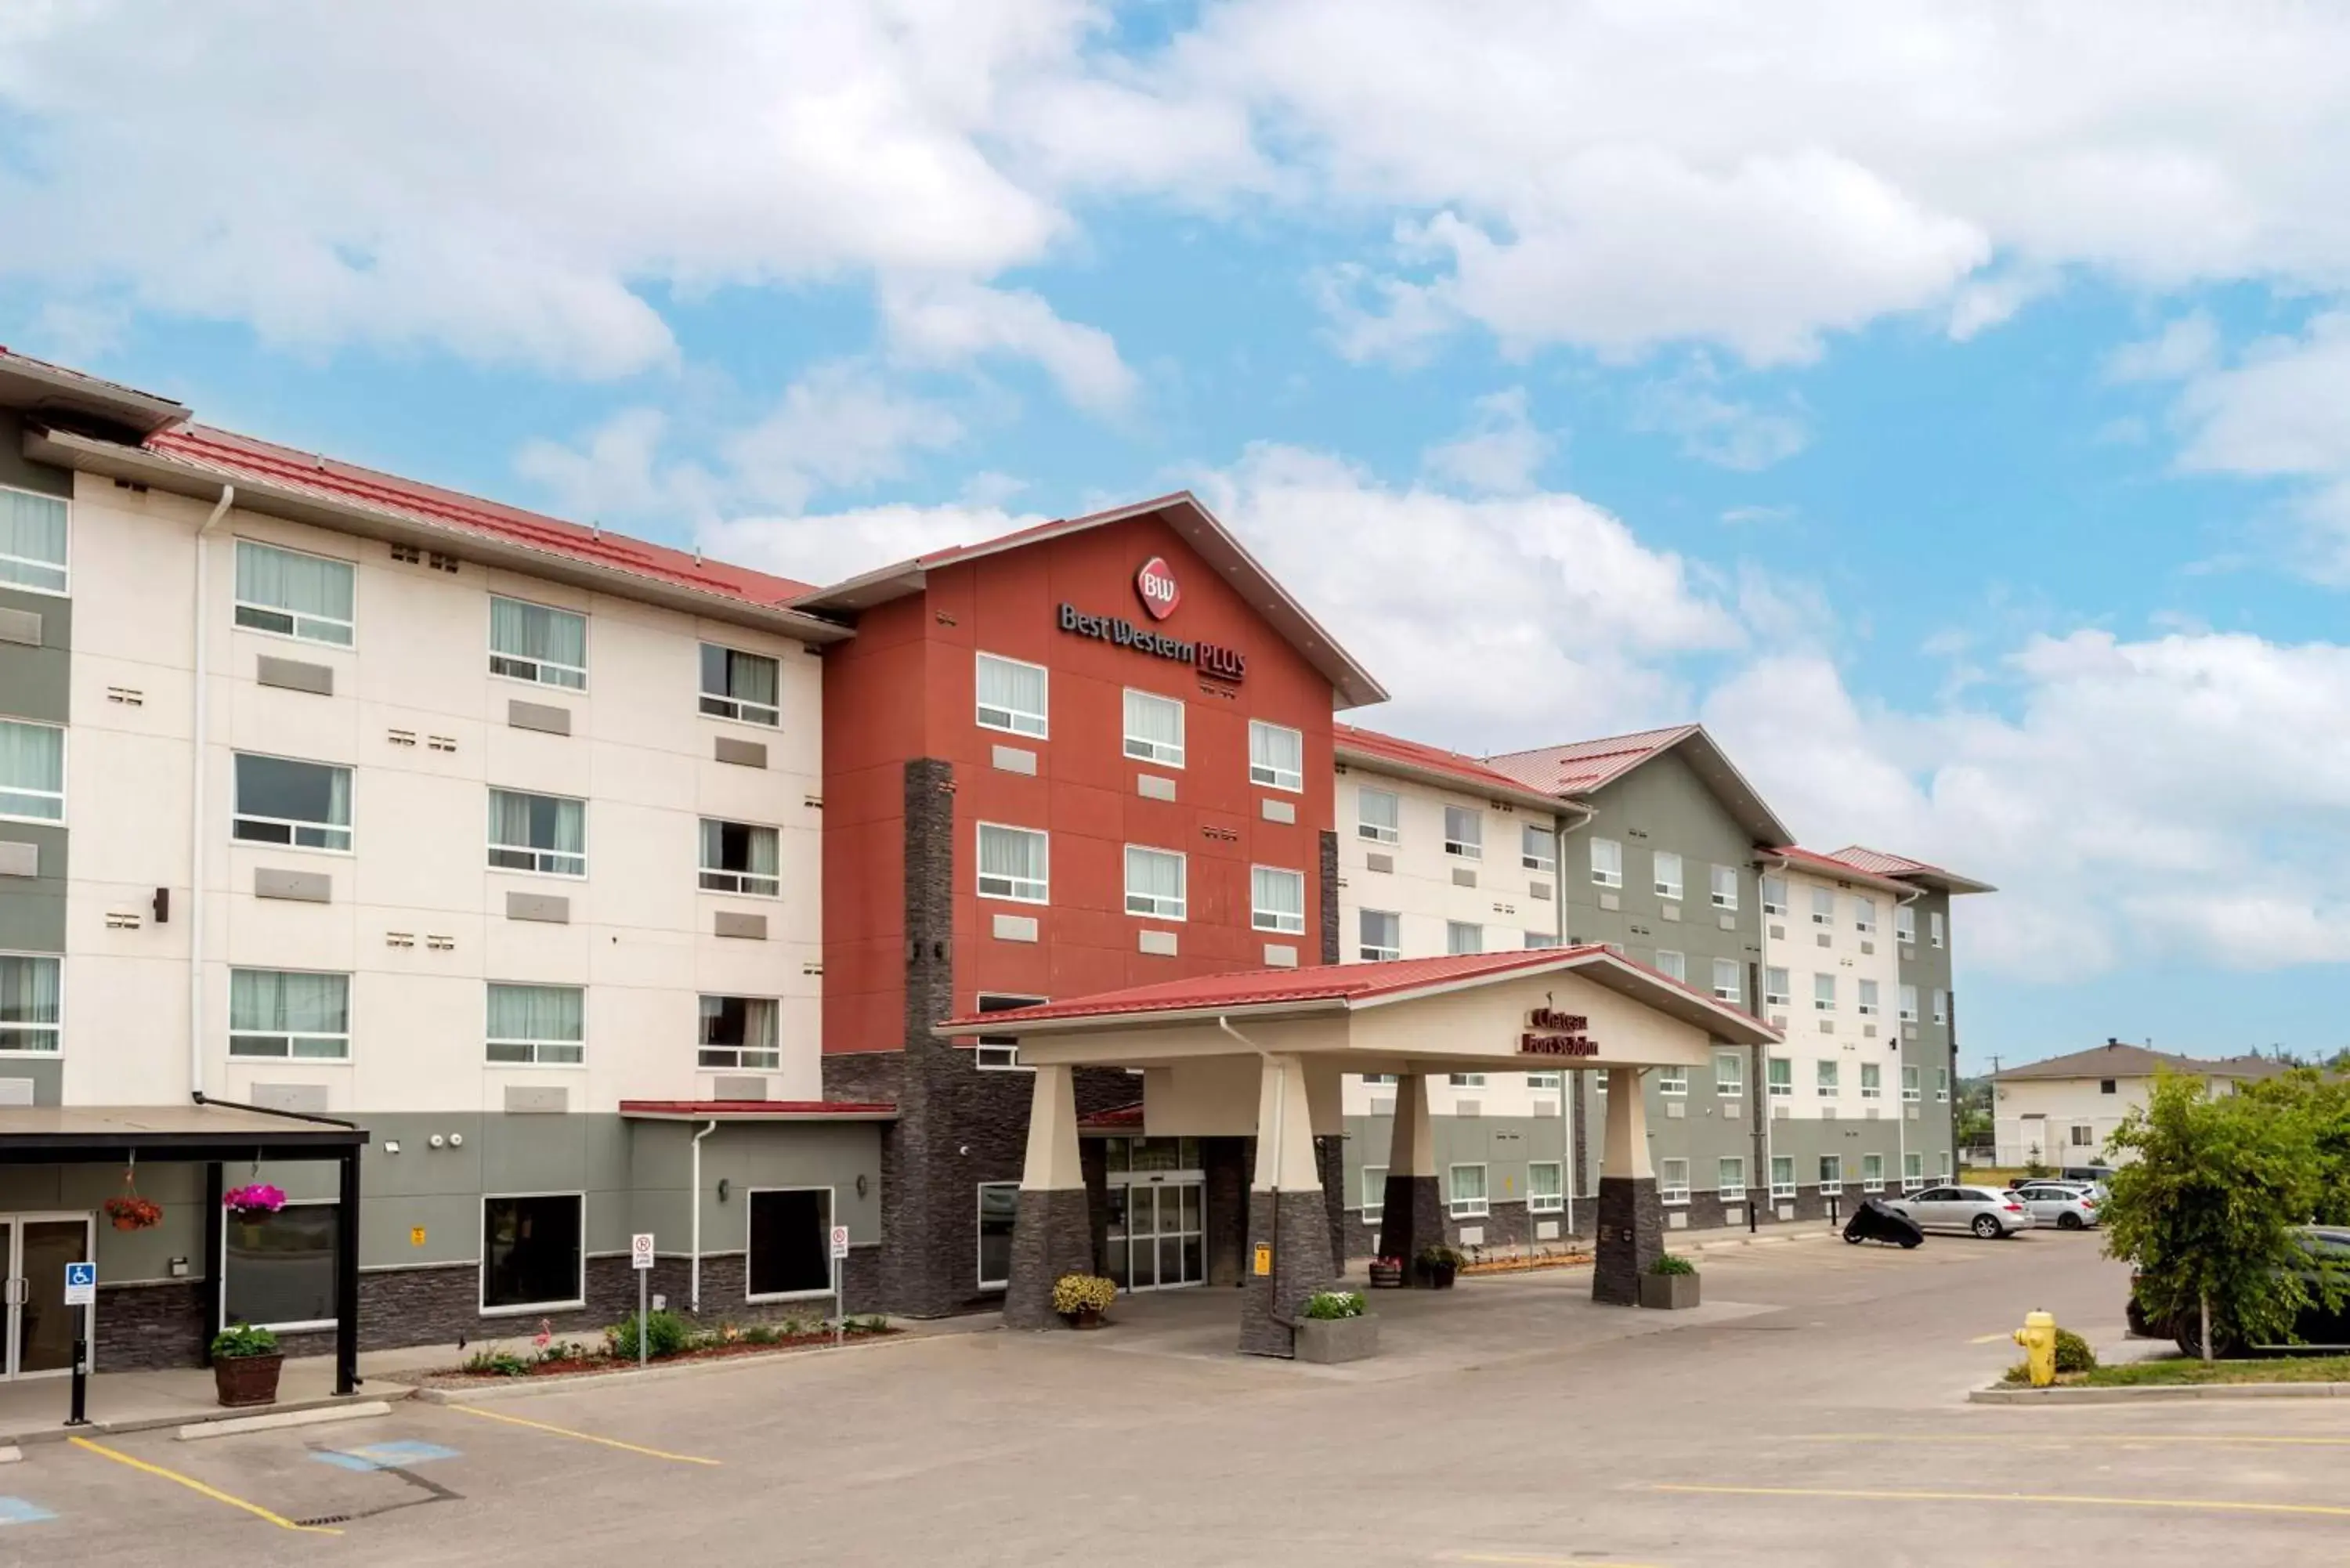 Property Building in Best Western Plus Chateau Fort St. John